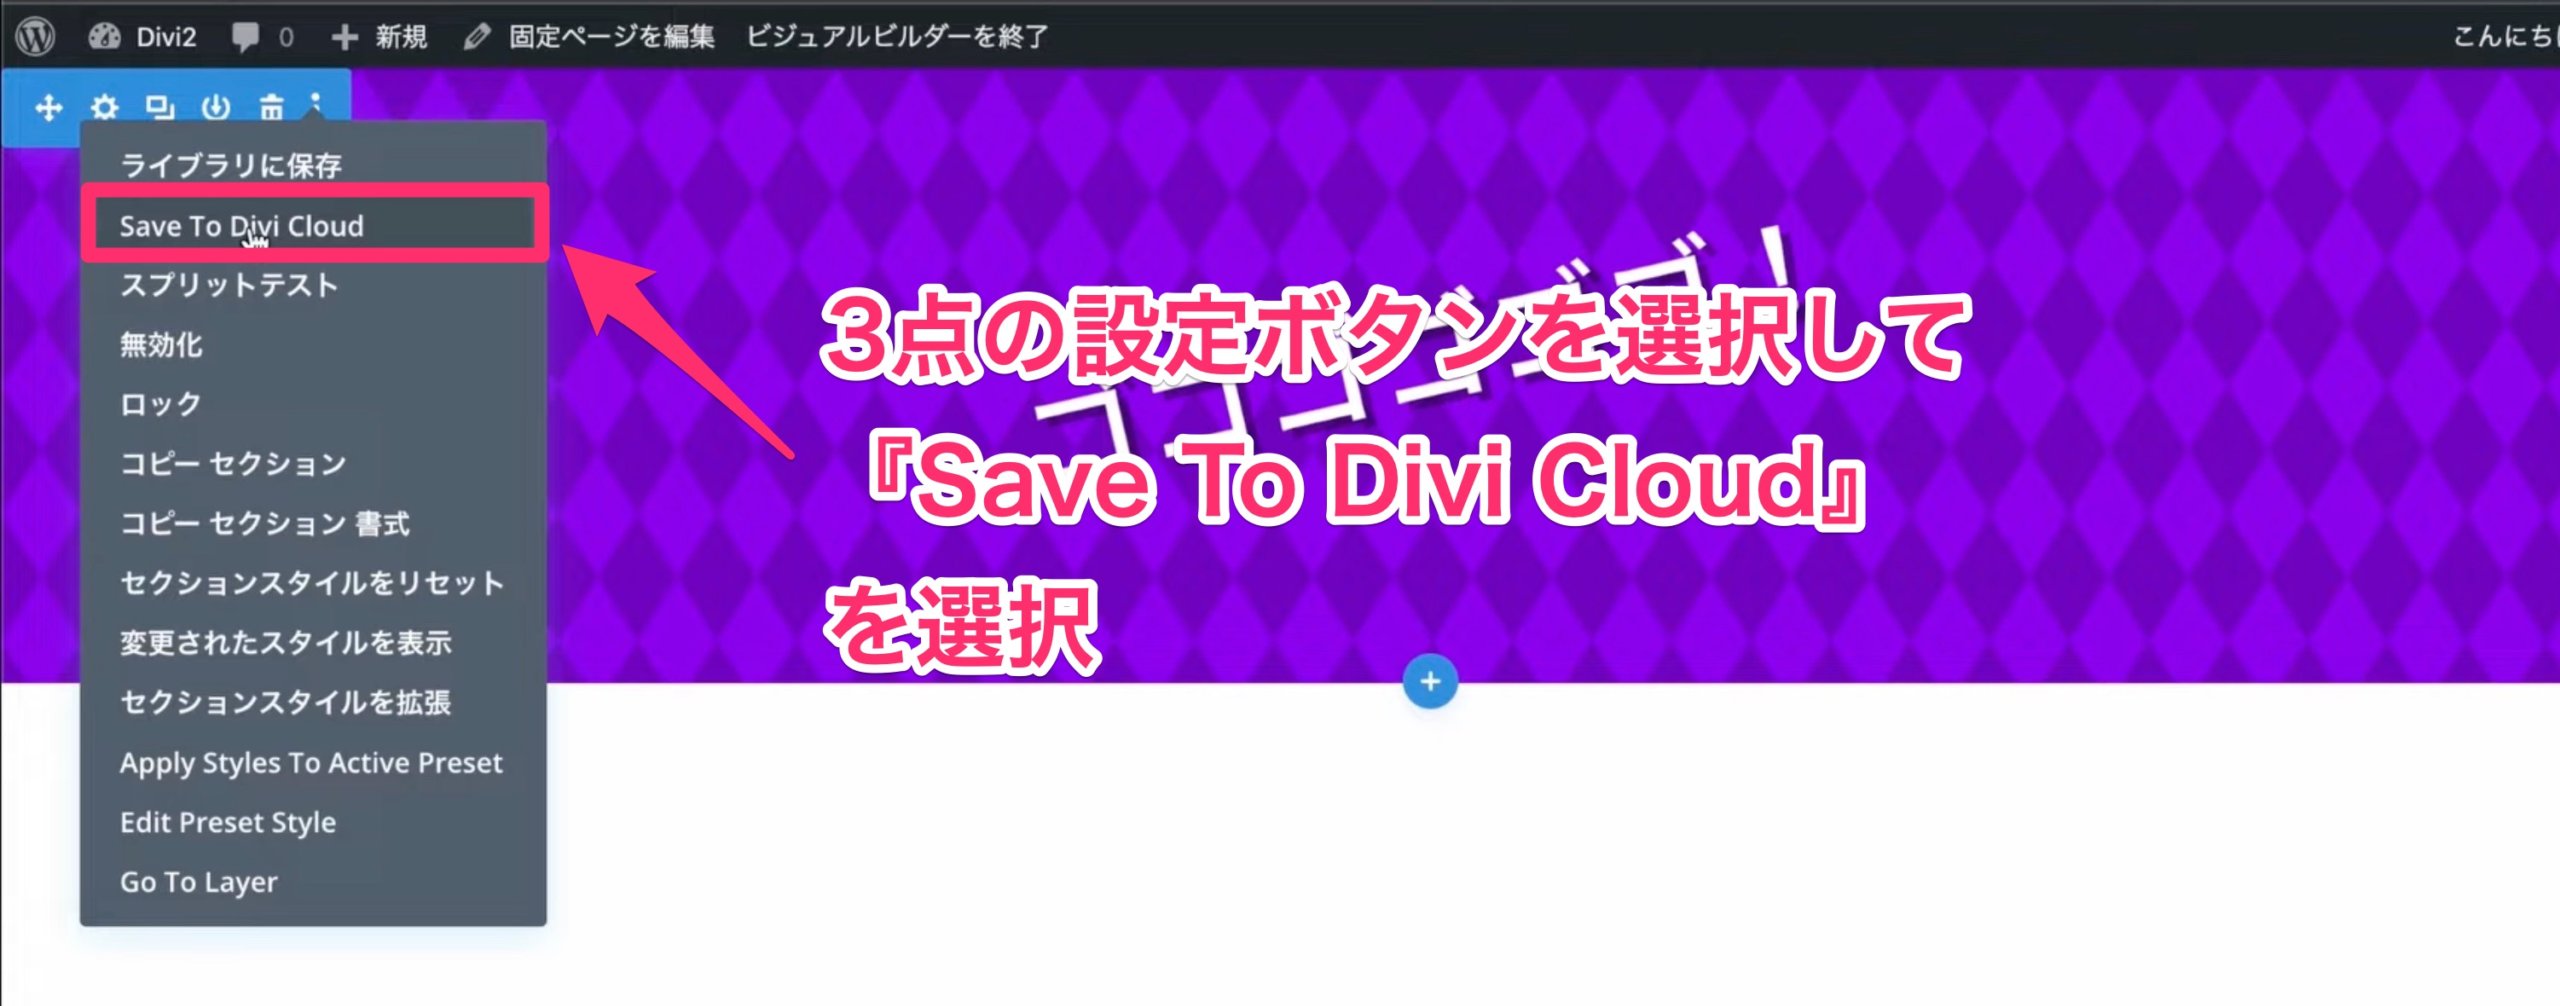 Save To Divi Cloudを選択